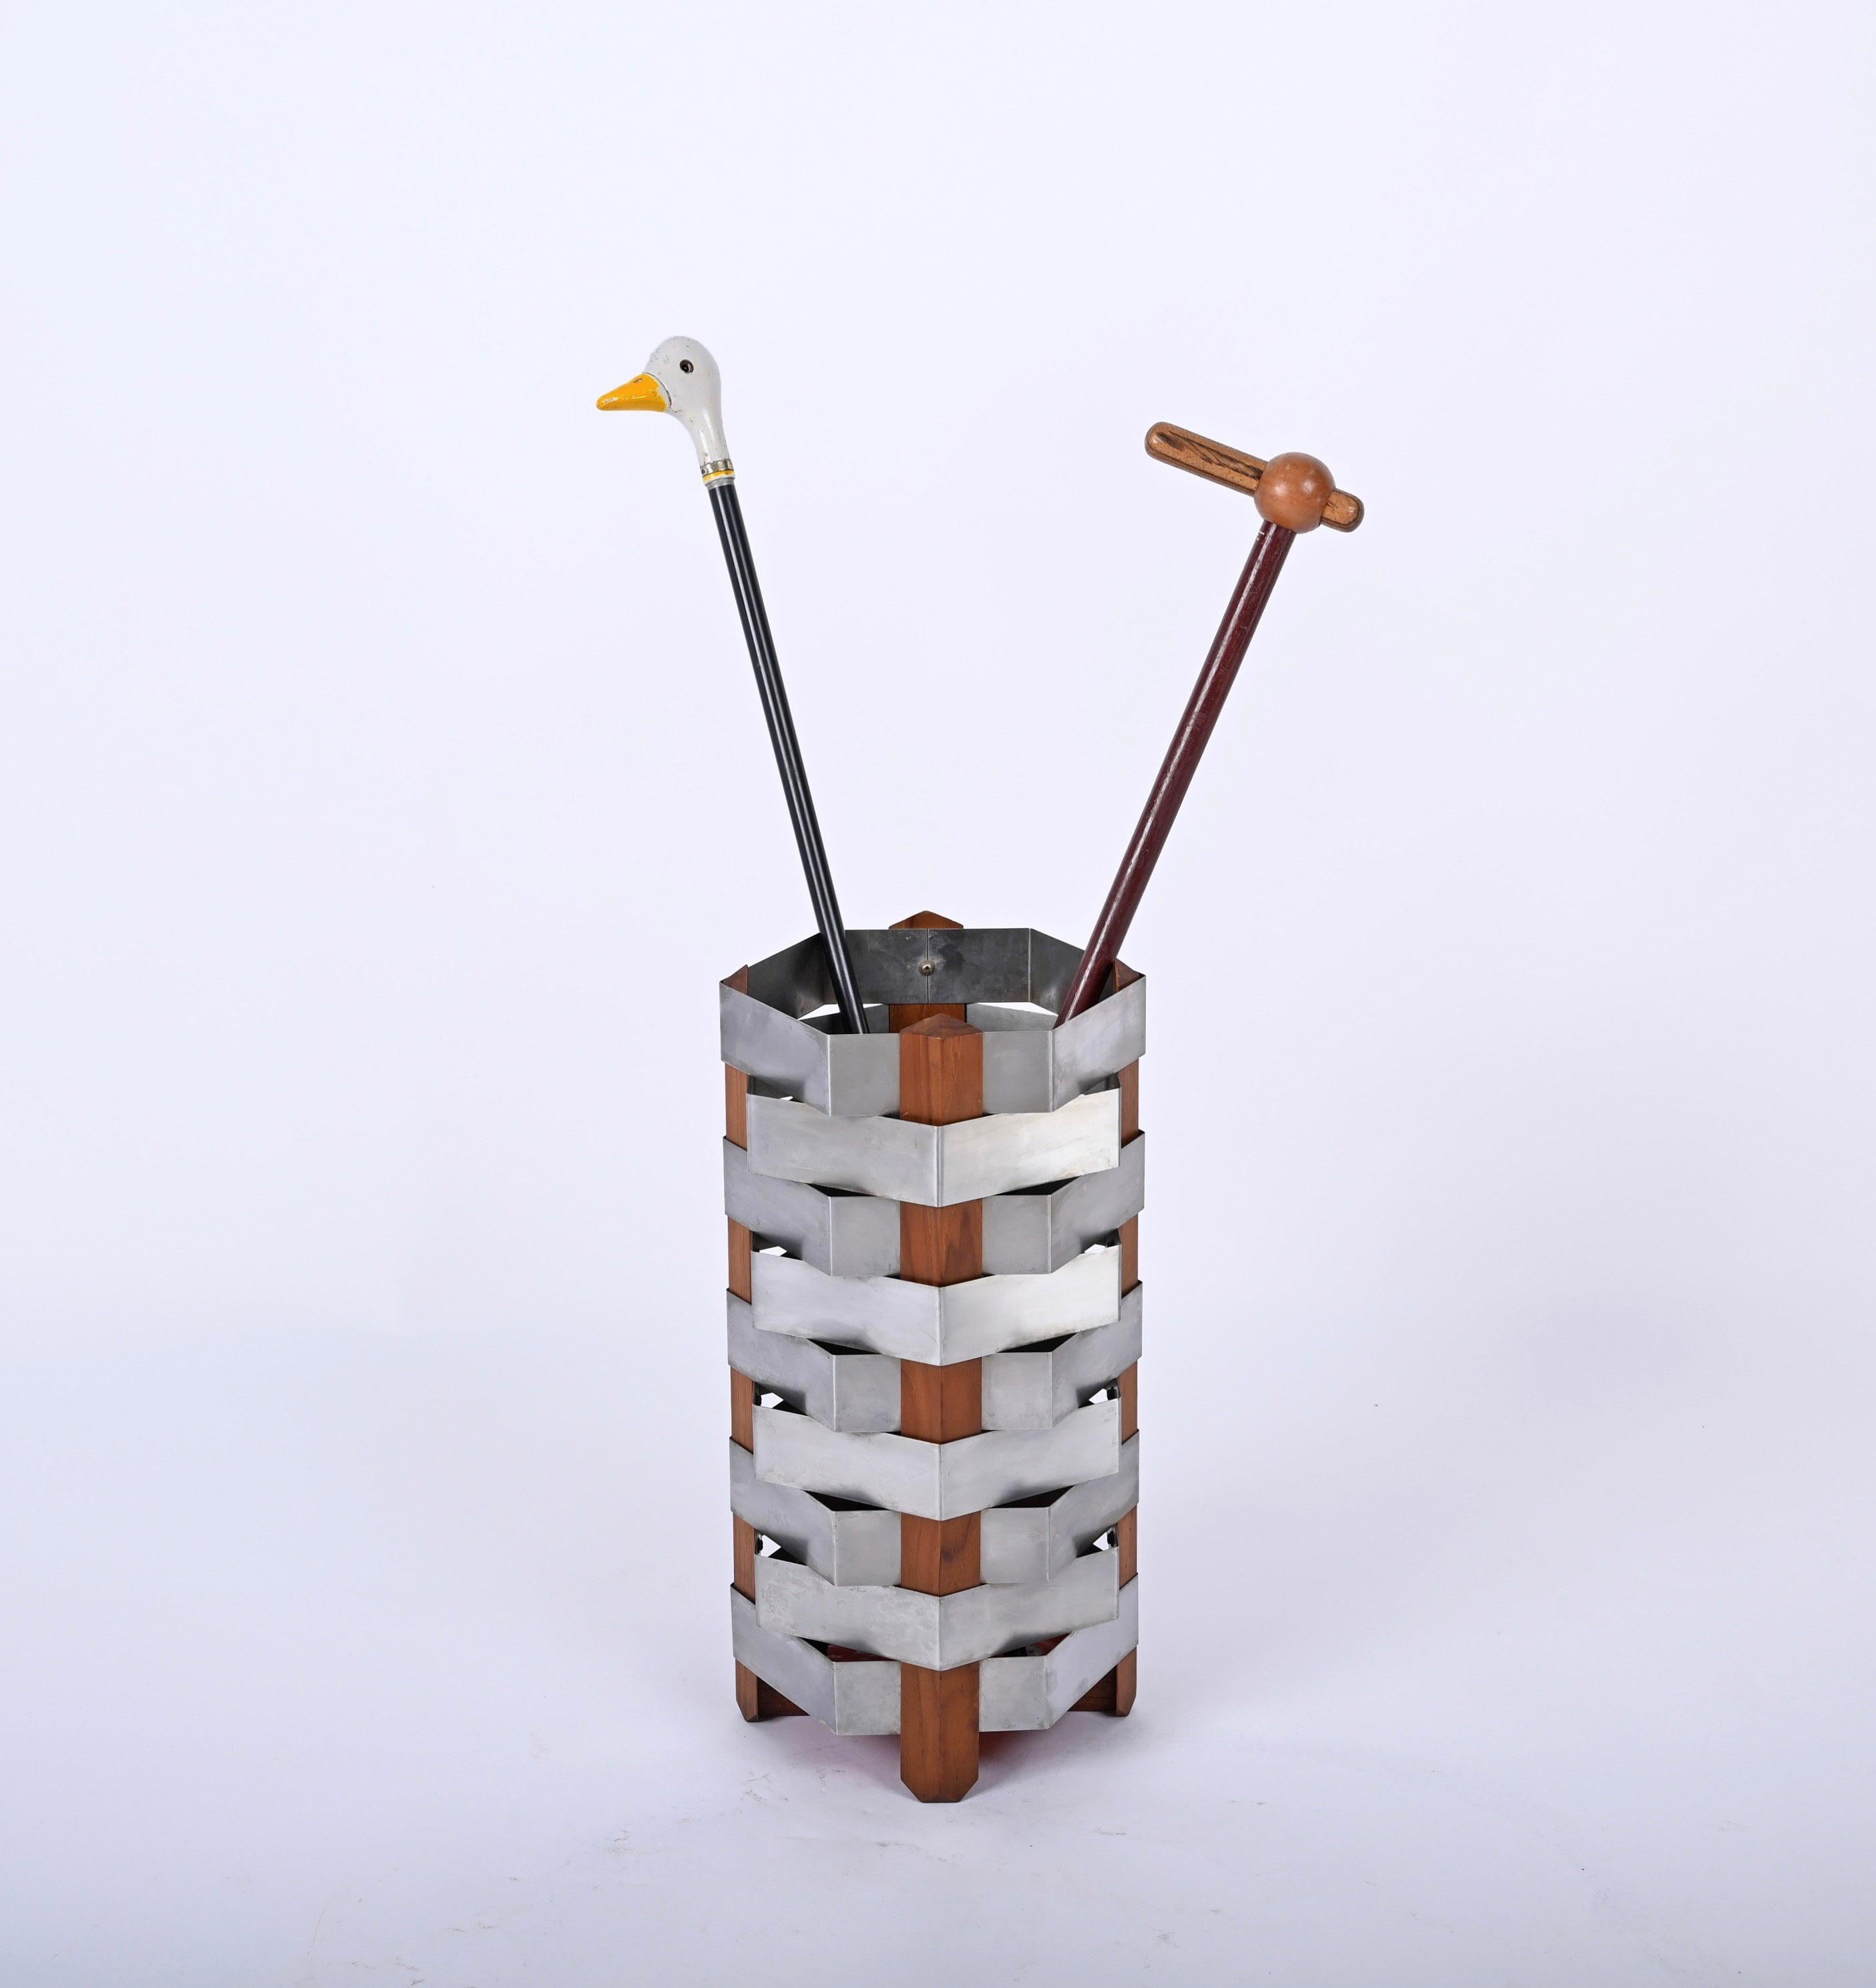 Perseo umbrella stand, model 1701 designed by Ico Parisi and produced by Stildomus in Italy in 1959. 

This incredible piece is made of four triangular supports in solid teak wood that hold together an elegant weave of stainless steel strips